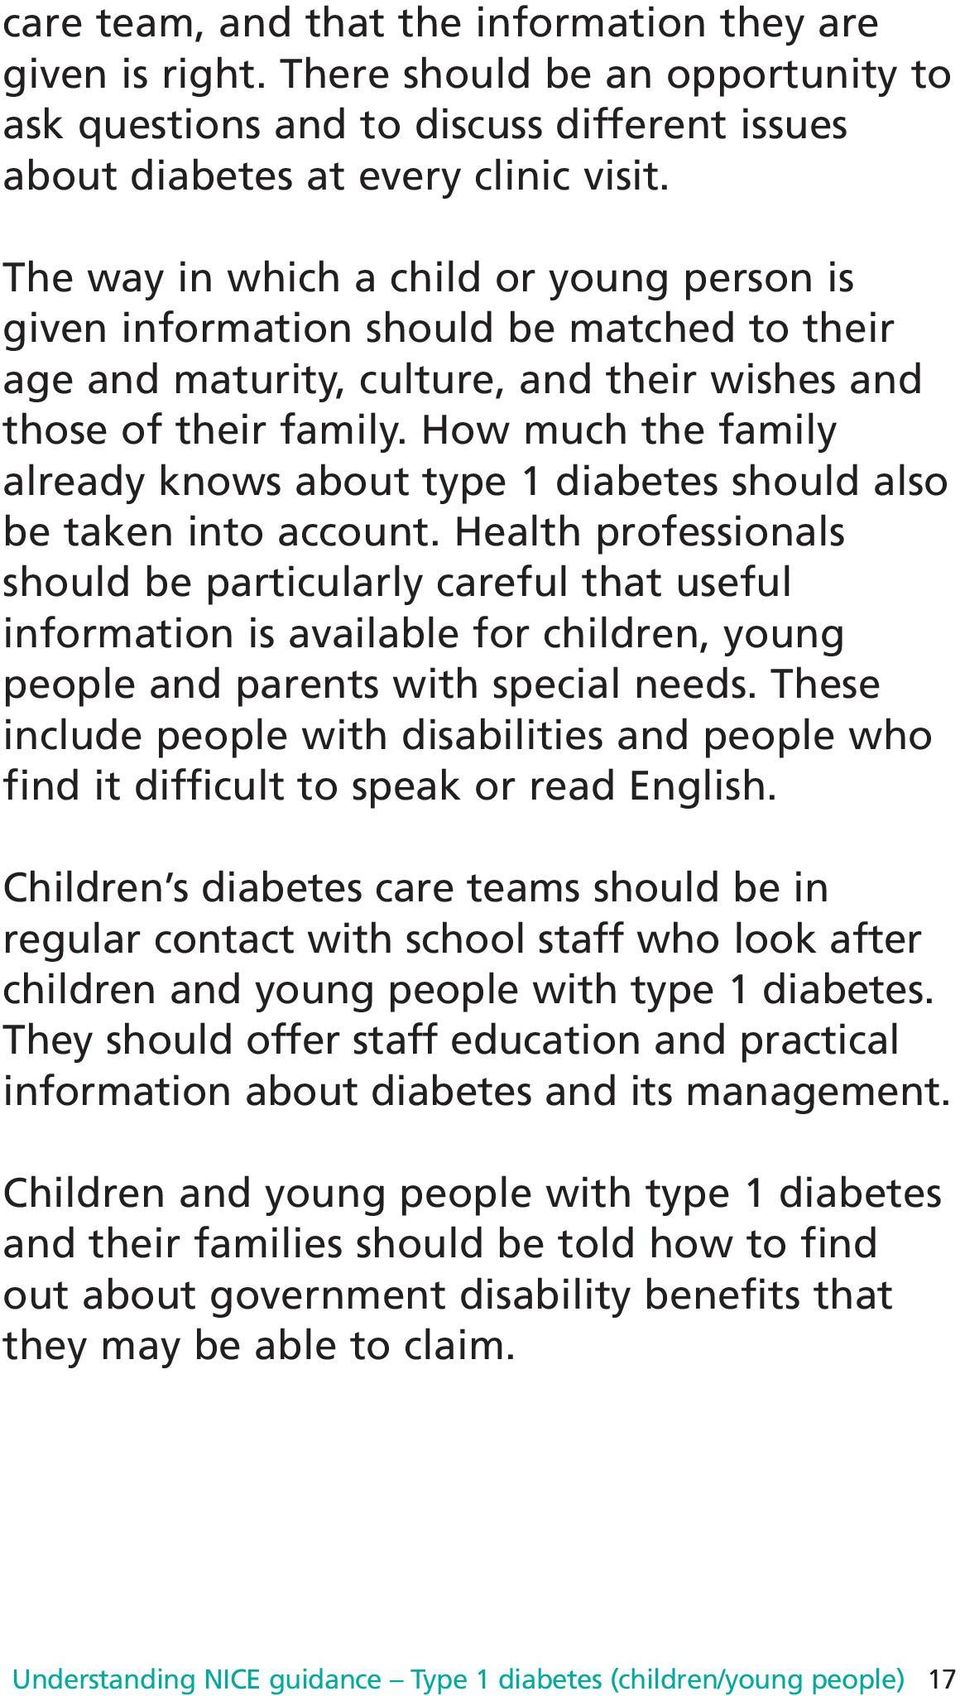 How much the family already knows about type 1 diabetes should also be taken into account.